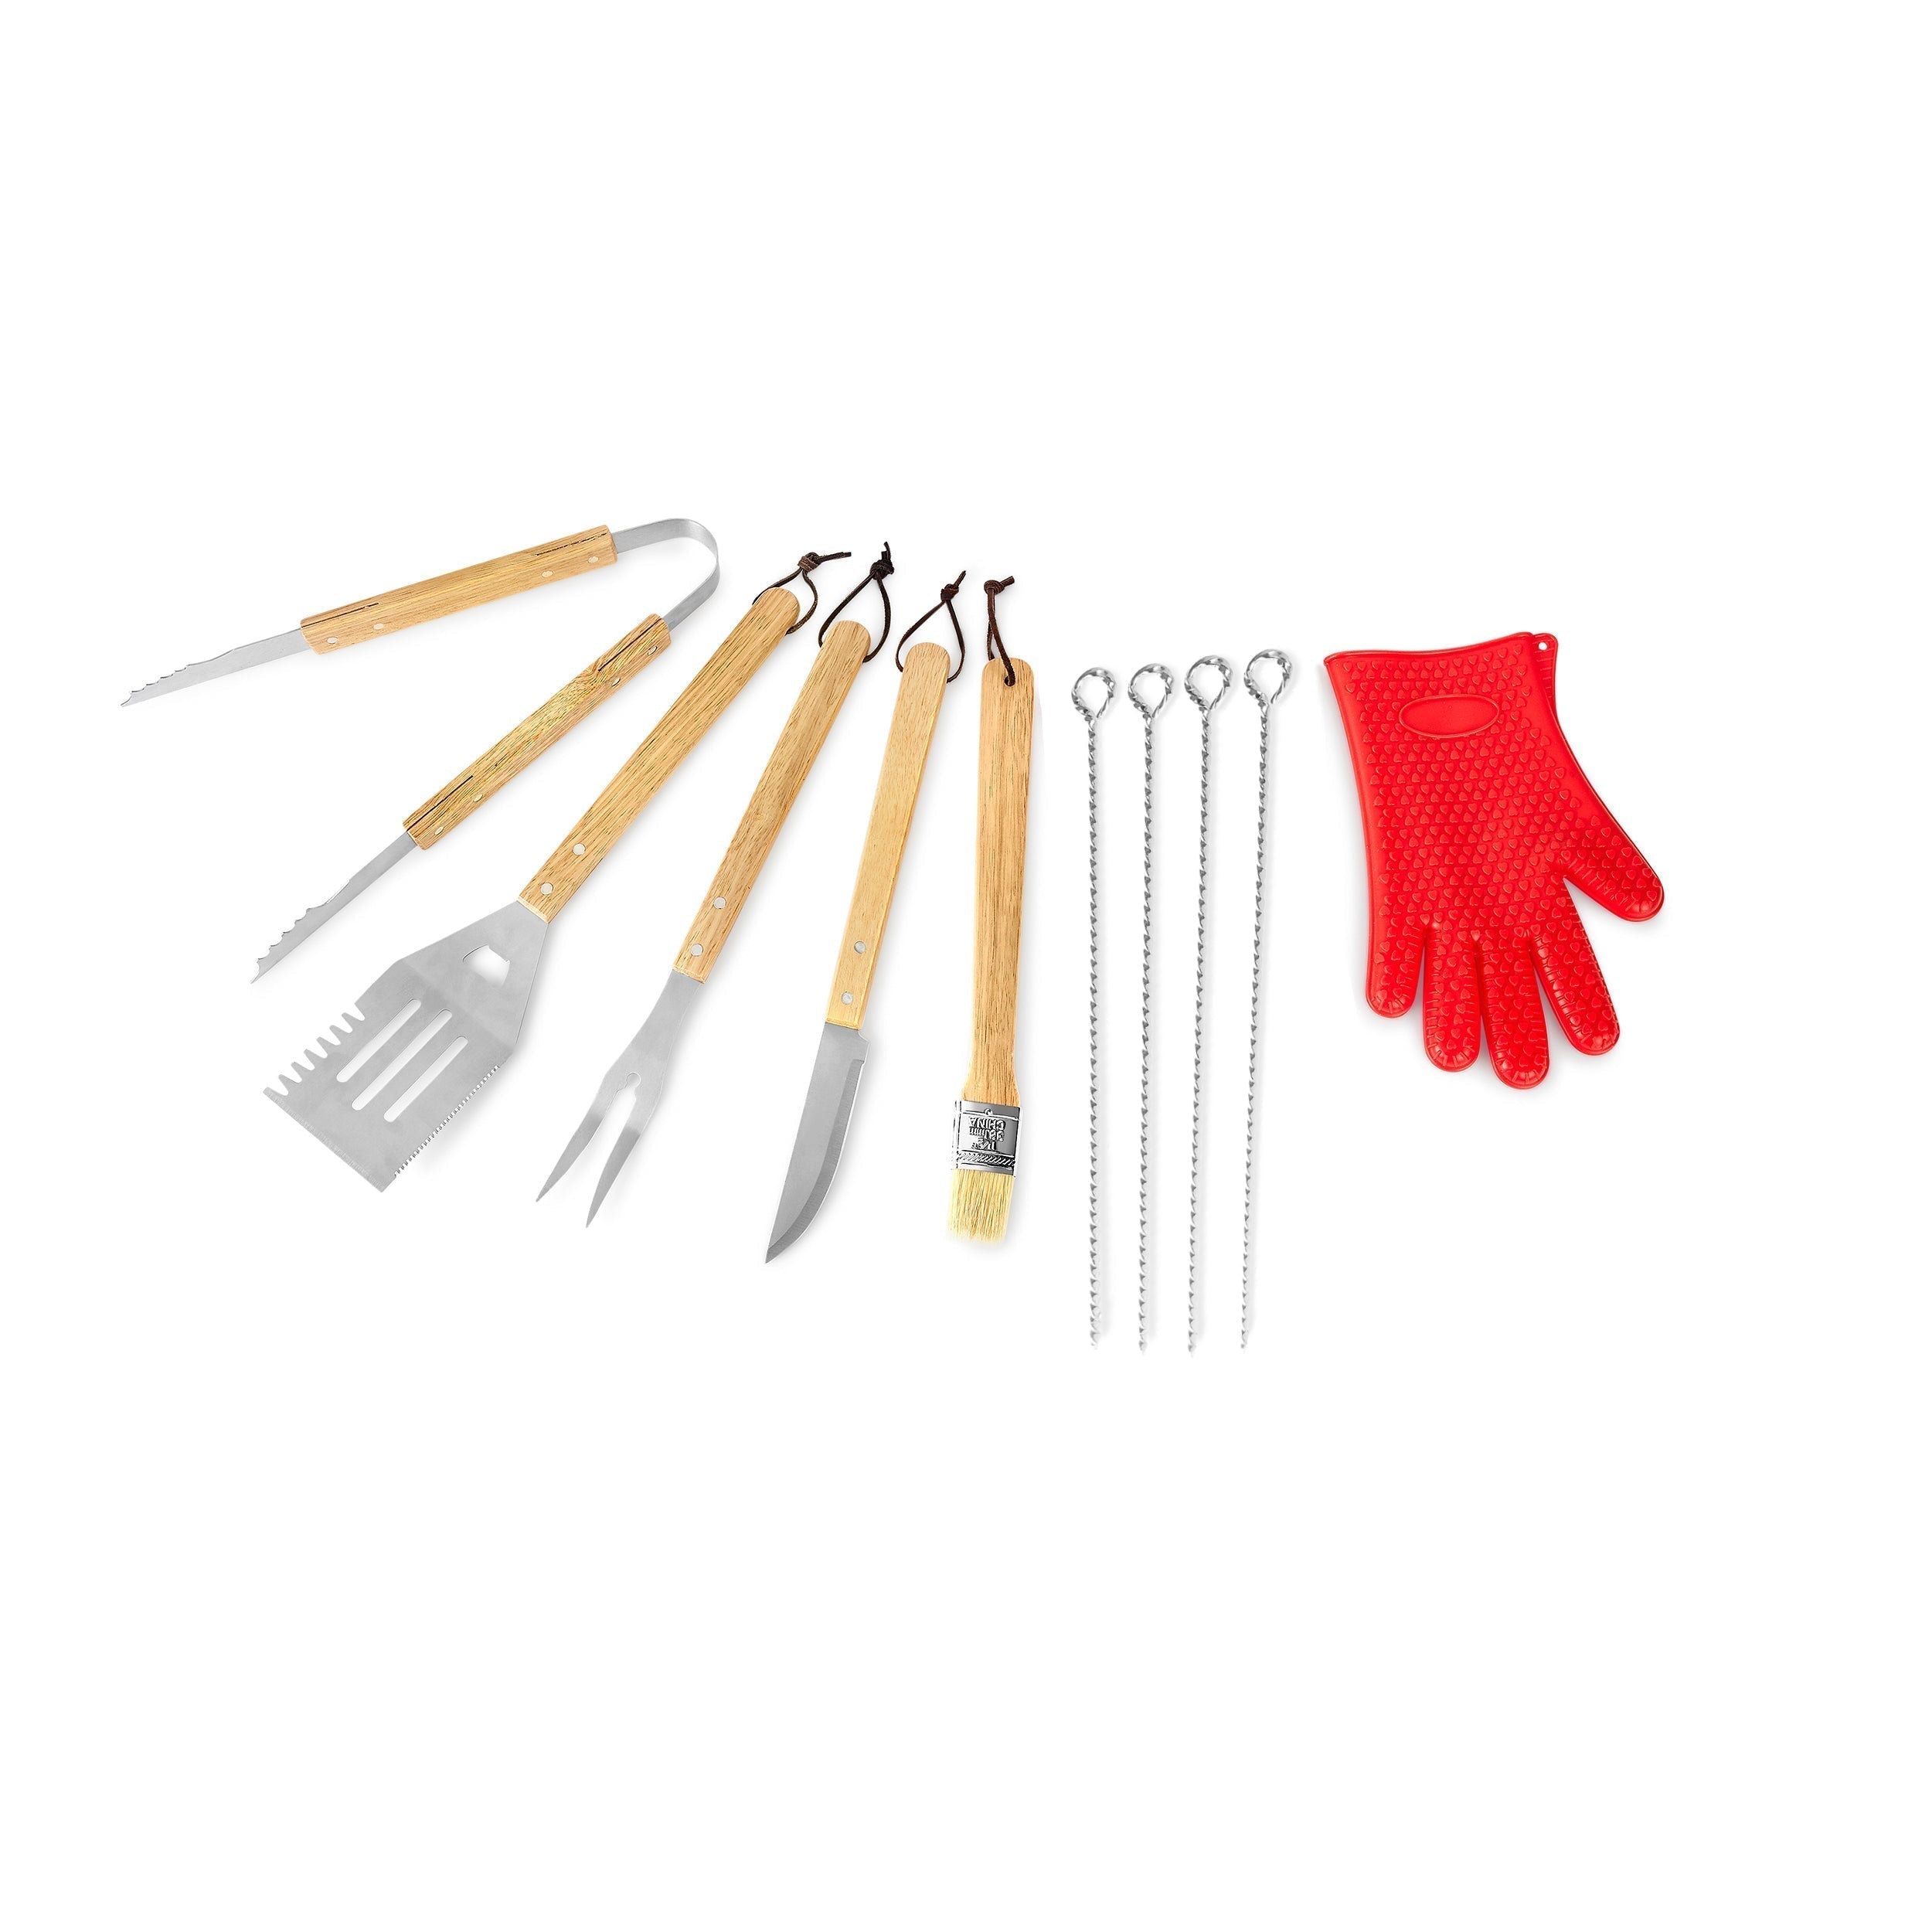 11 Piece BBQ Grill Set - Only Fresh Meat